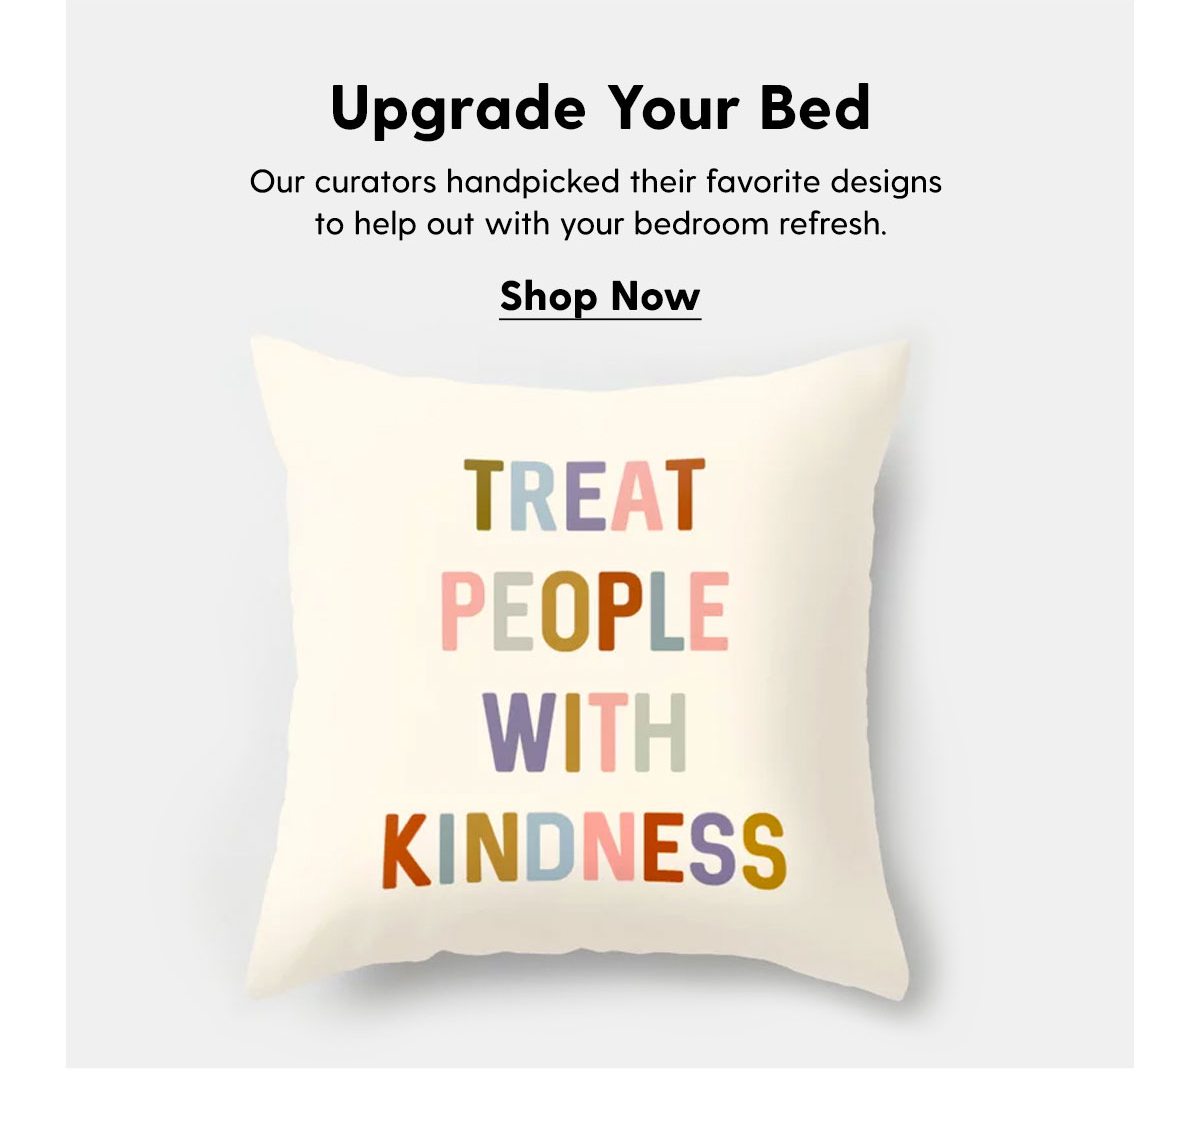 Upgrade Your Bed Our curators handpicked their favorite designs to help out with your bedroom refresh. Shop Now